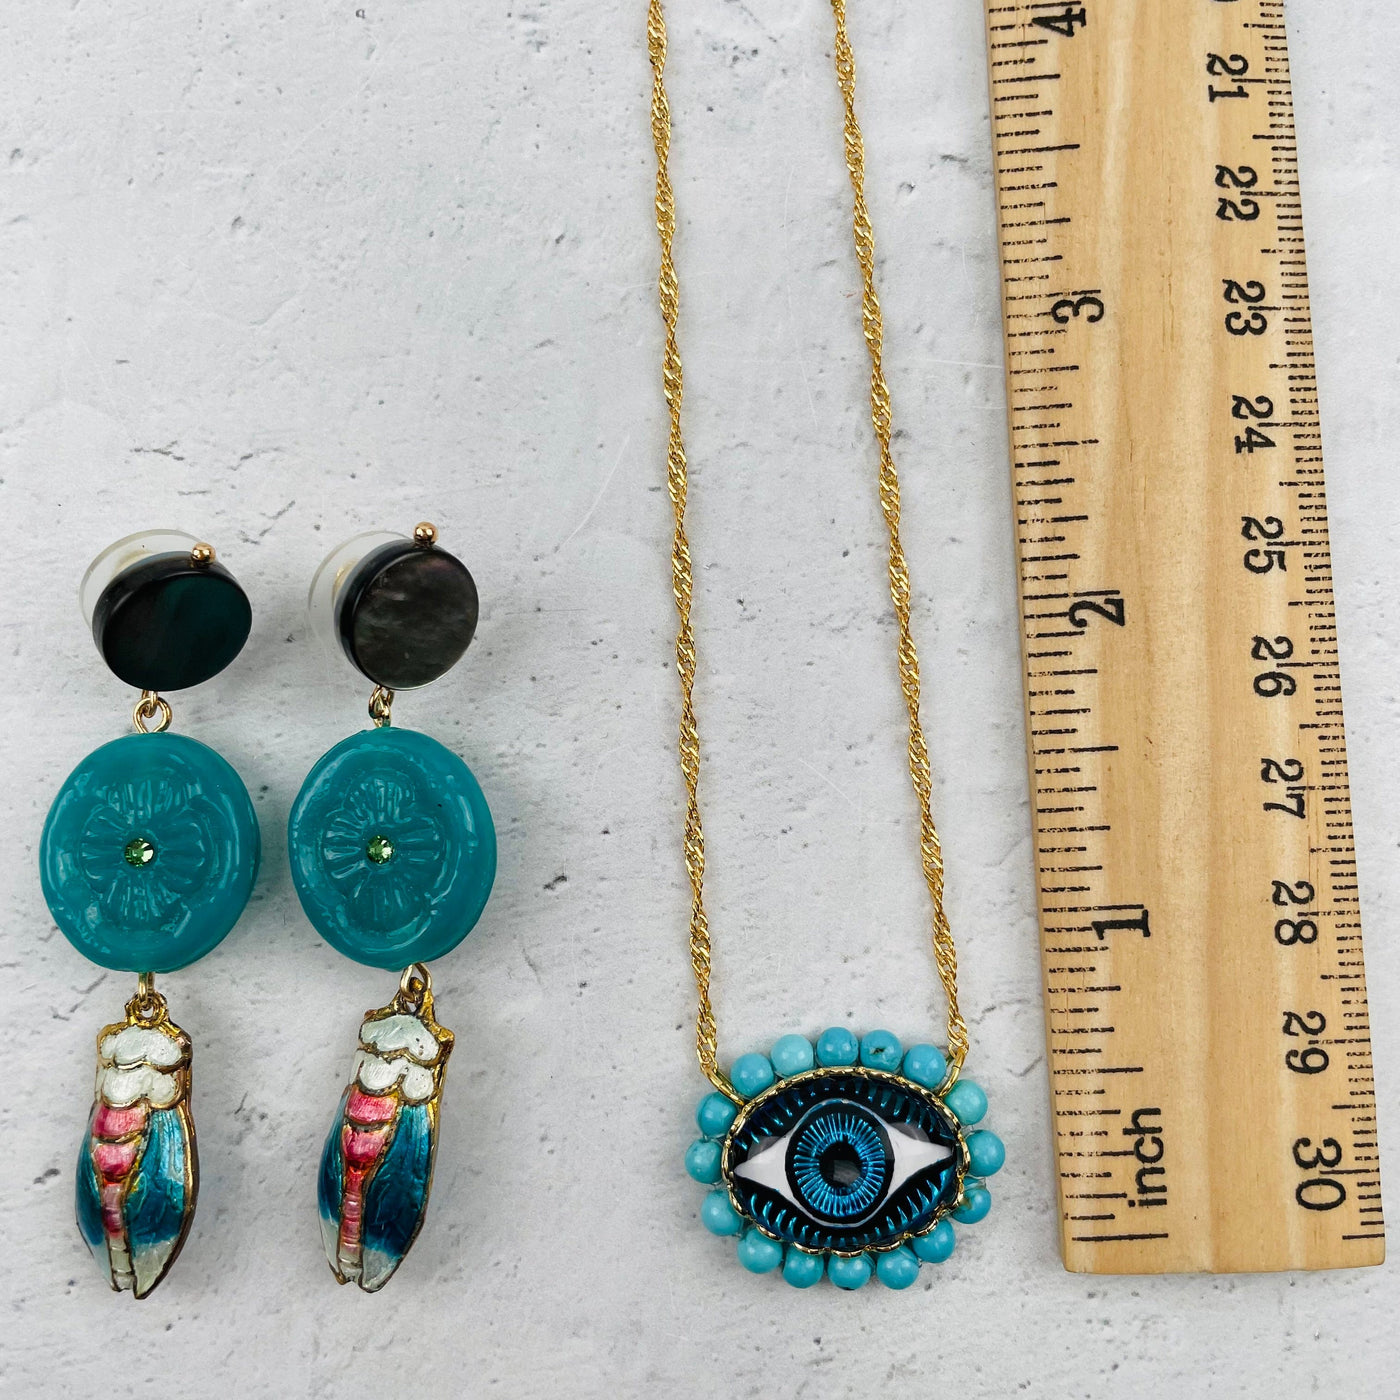 earrings and pendant next to a ruler for size reference 